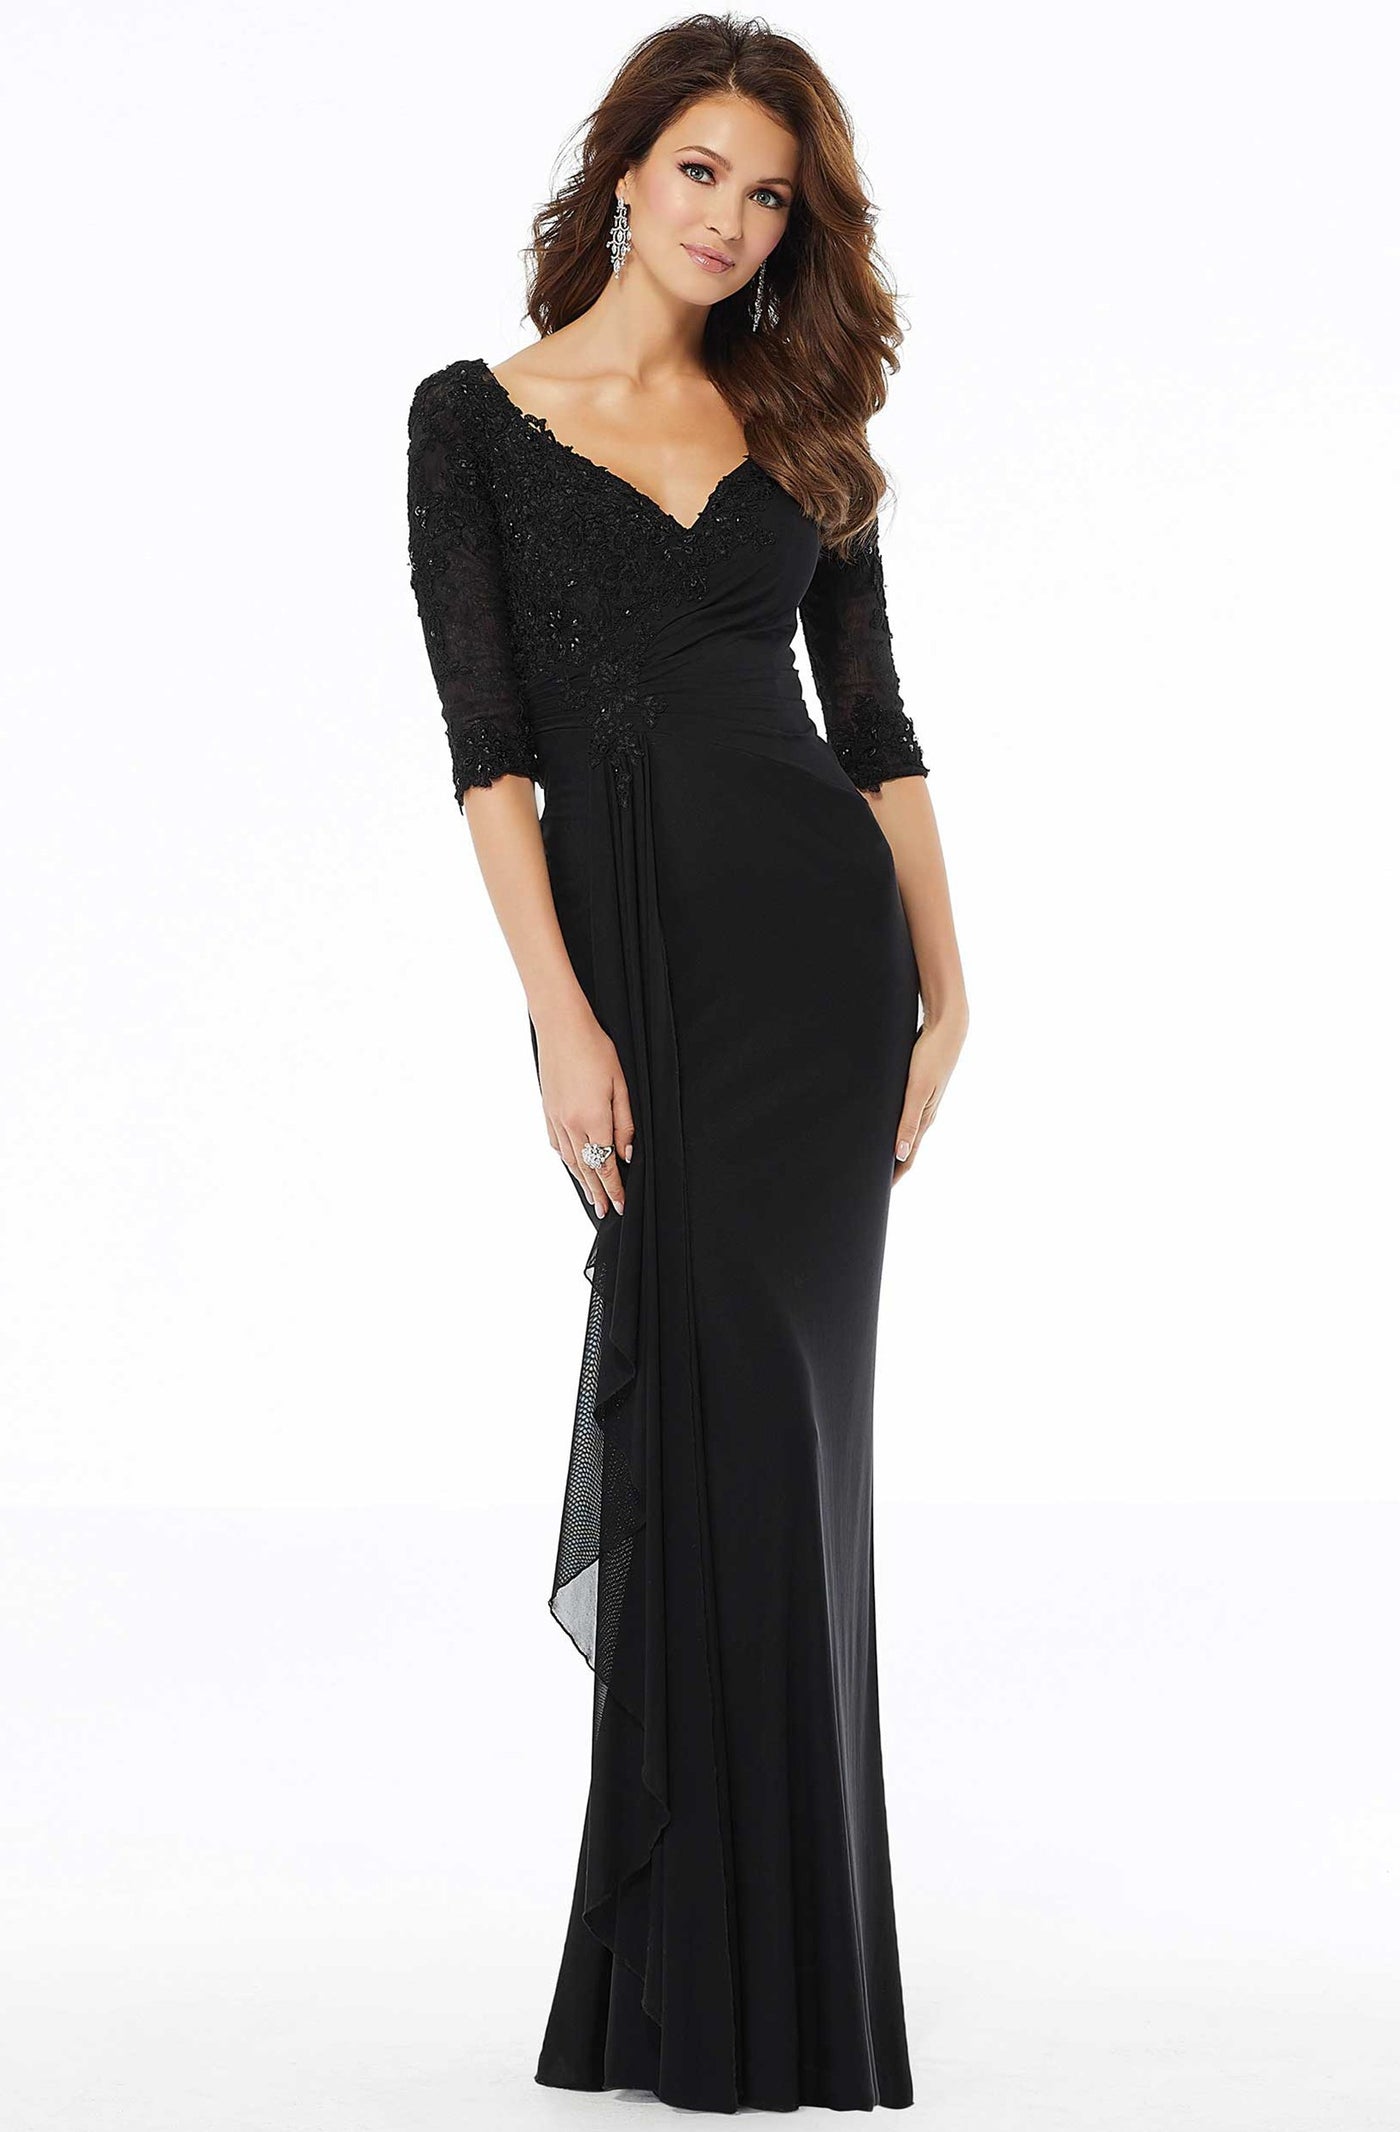 MGNY By Mori Lee - Quarter Sleeve Beded Lace V-Neck Dress 72114SC In Black